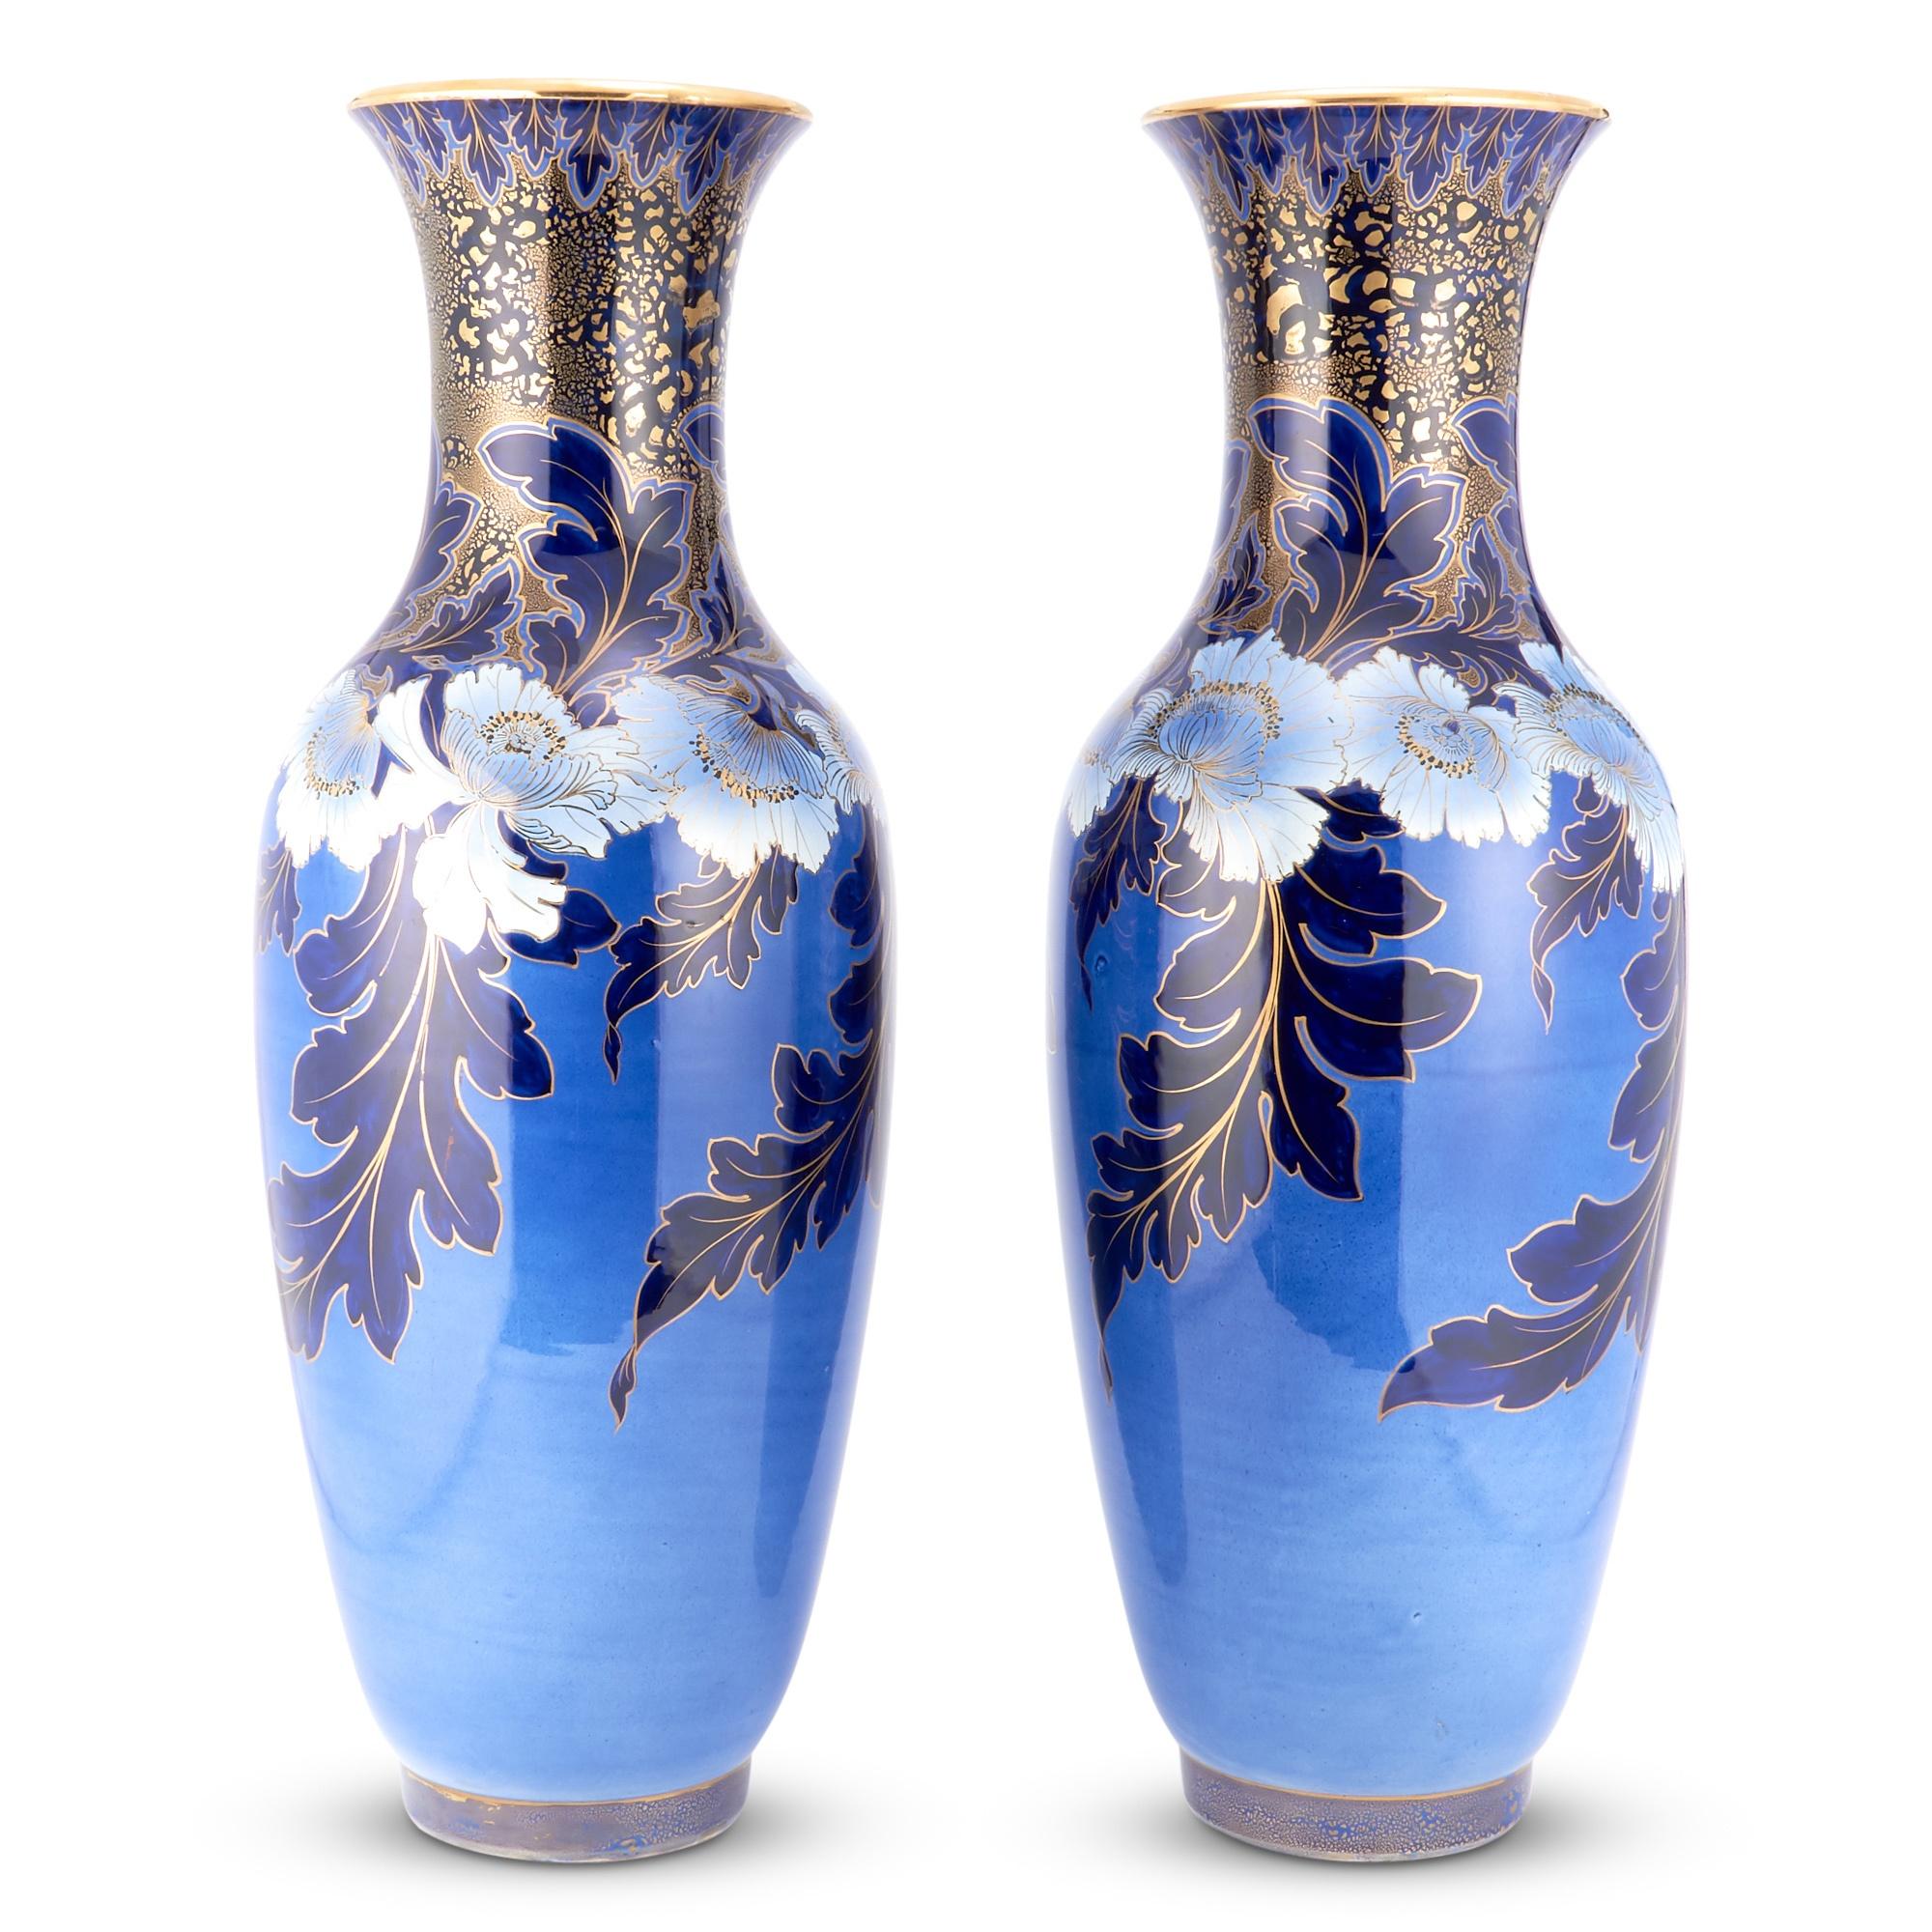 Immerse yourself in the opulence of the early 19th Century with this exceptional pair of Hand-Painted & Gilt Decorated Vases, a true testament to the craftsmanship of the era. Each vase is a masterpiece in its own right, boasting a large, tapered